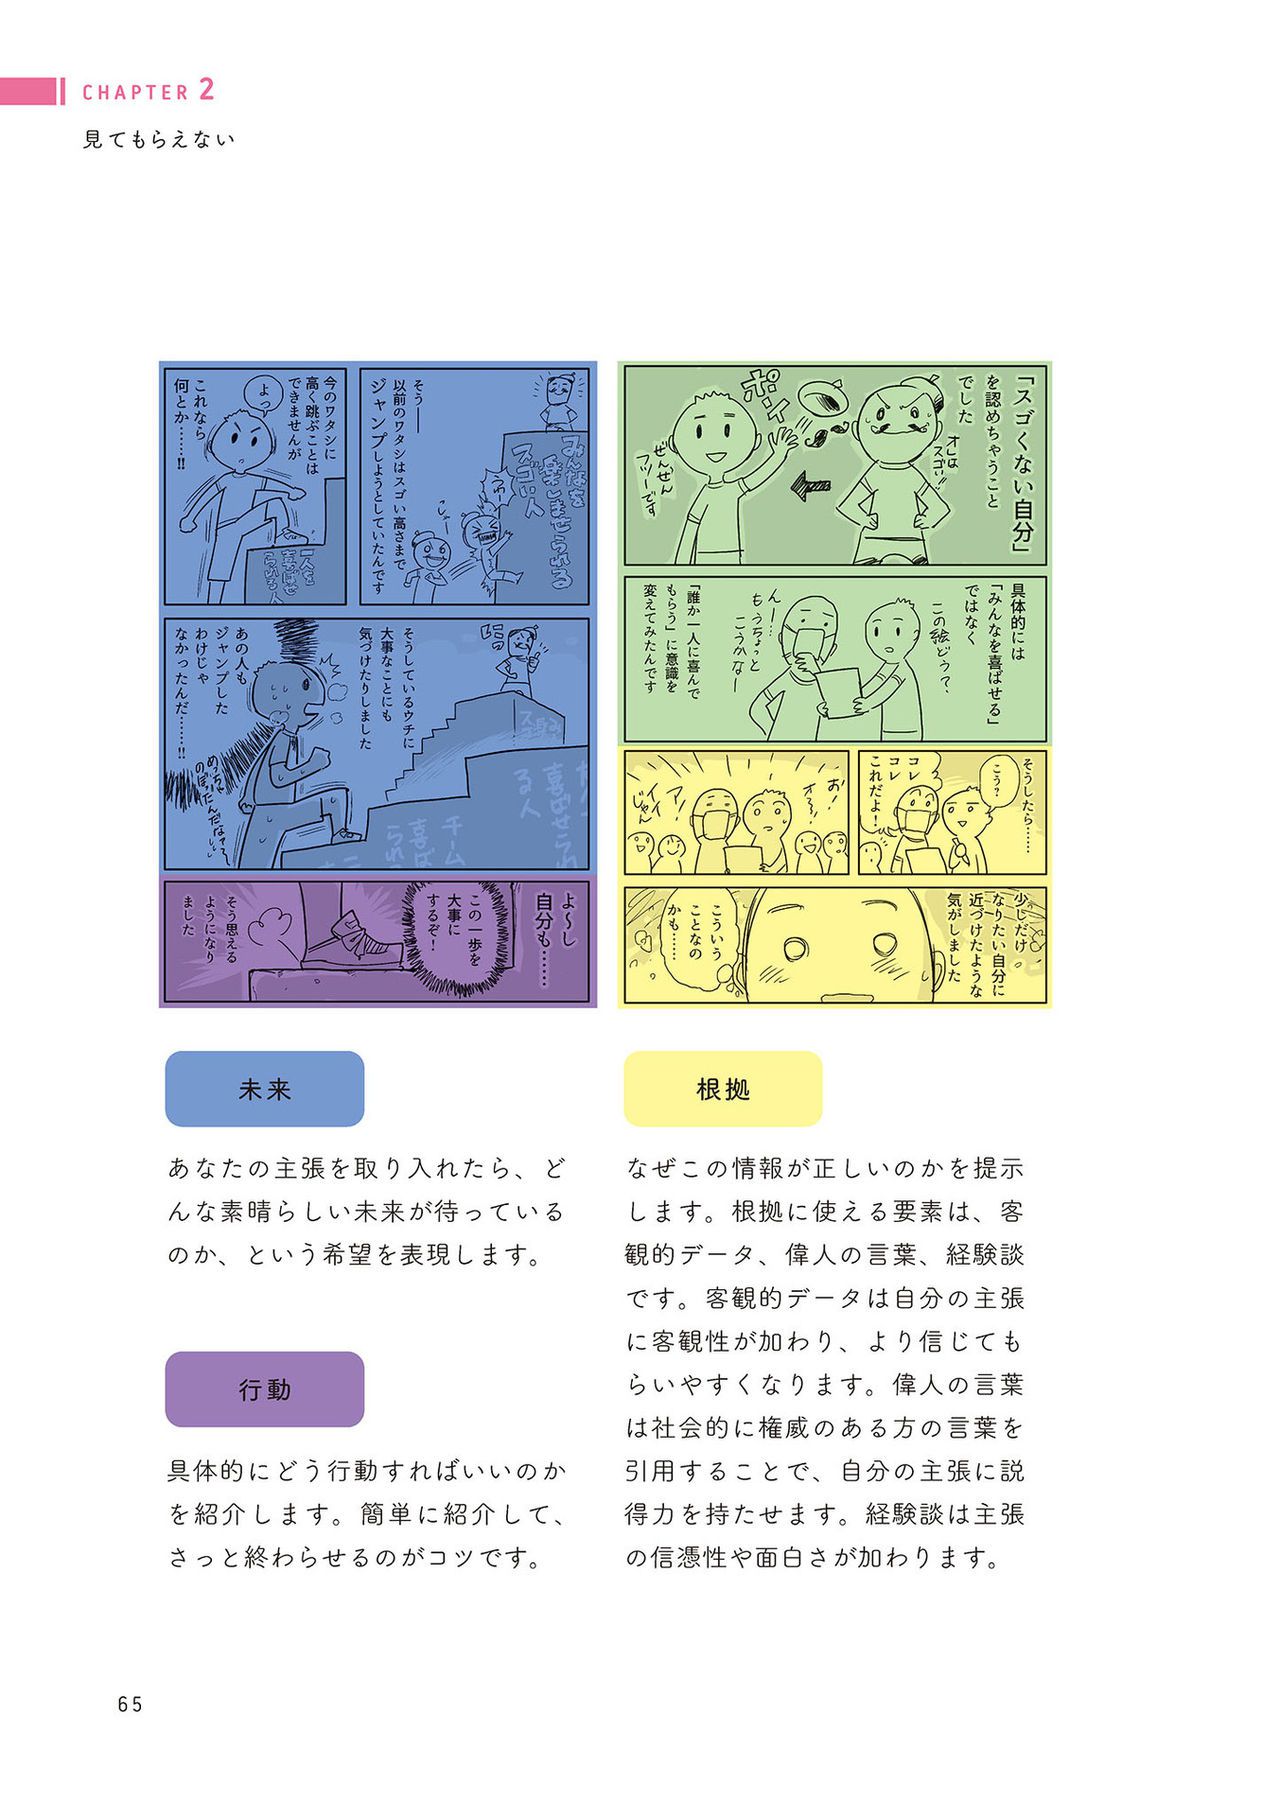 Prohibition of drawing well How to improve illustrations that are not smooth うまく描くの禁止 ツラくないイラスト上達法 66